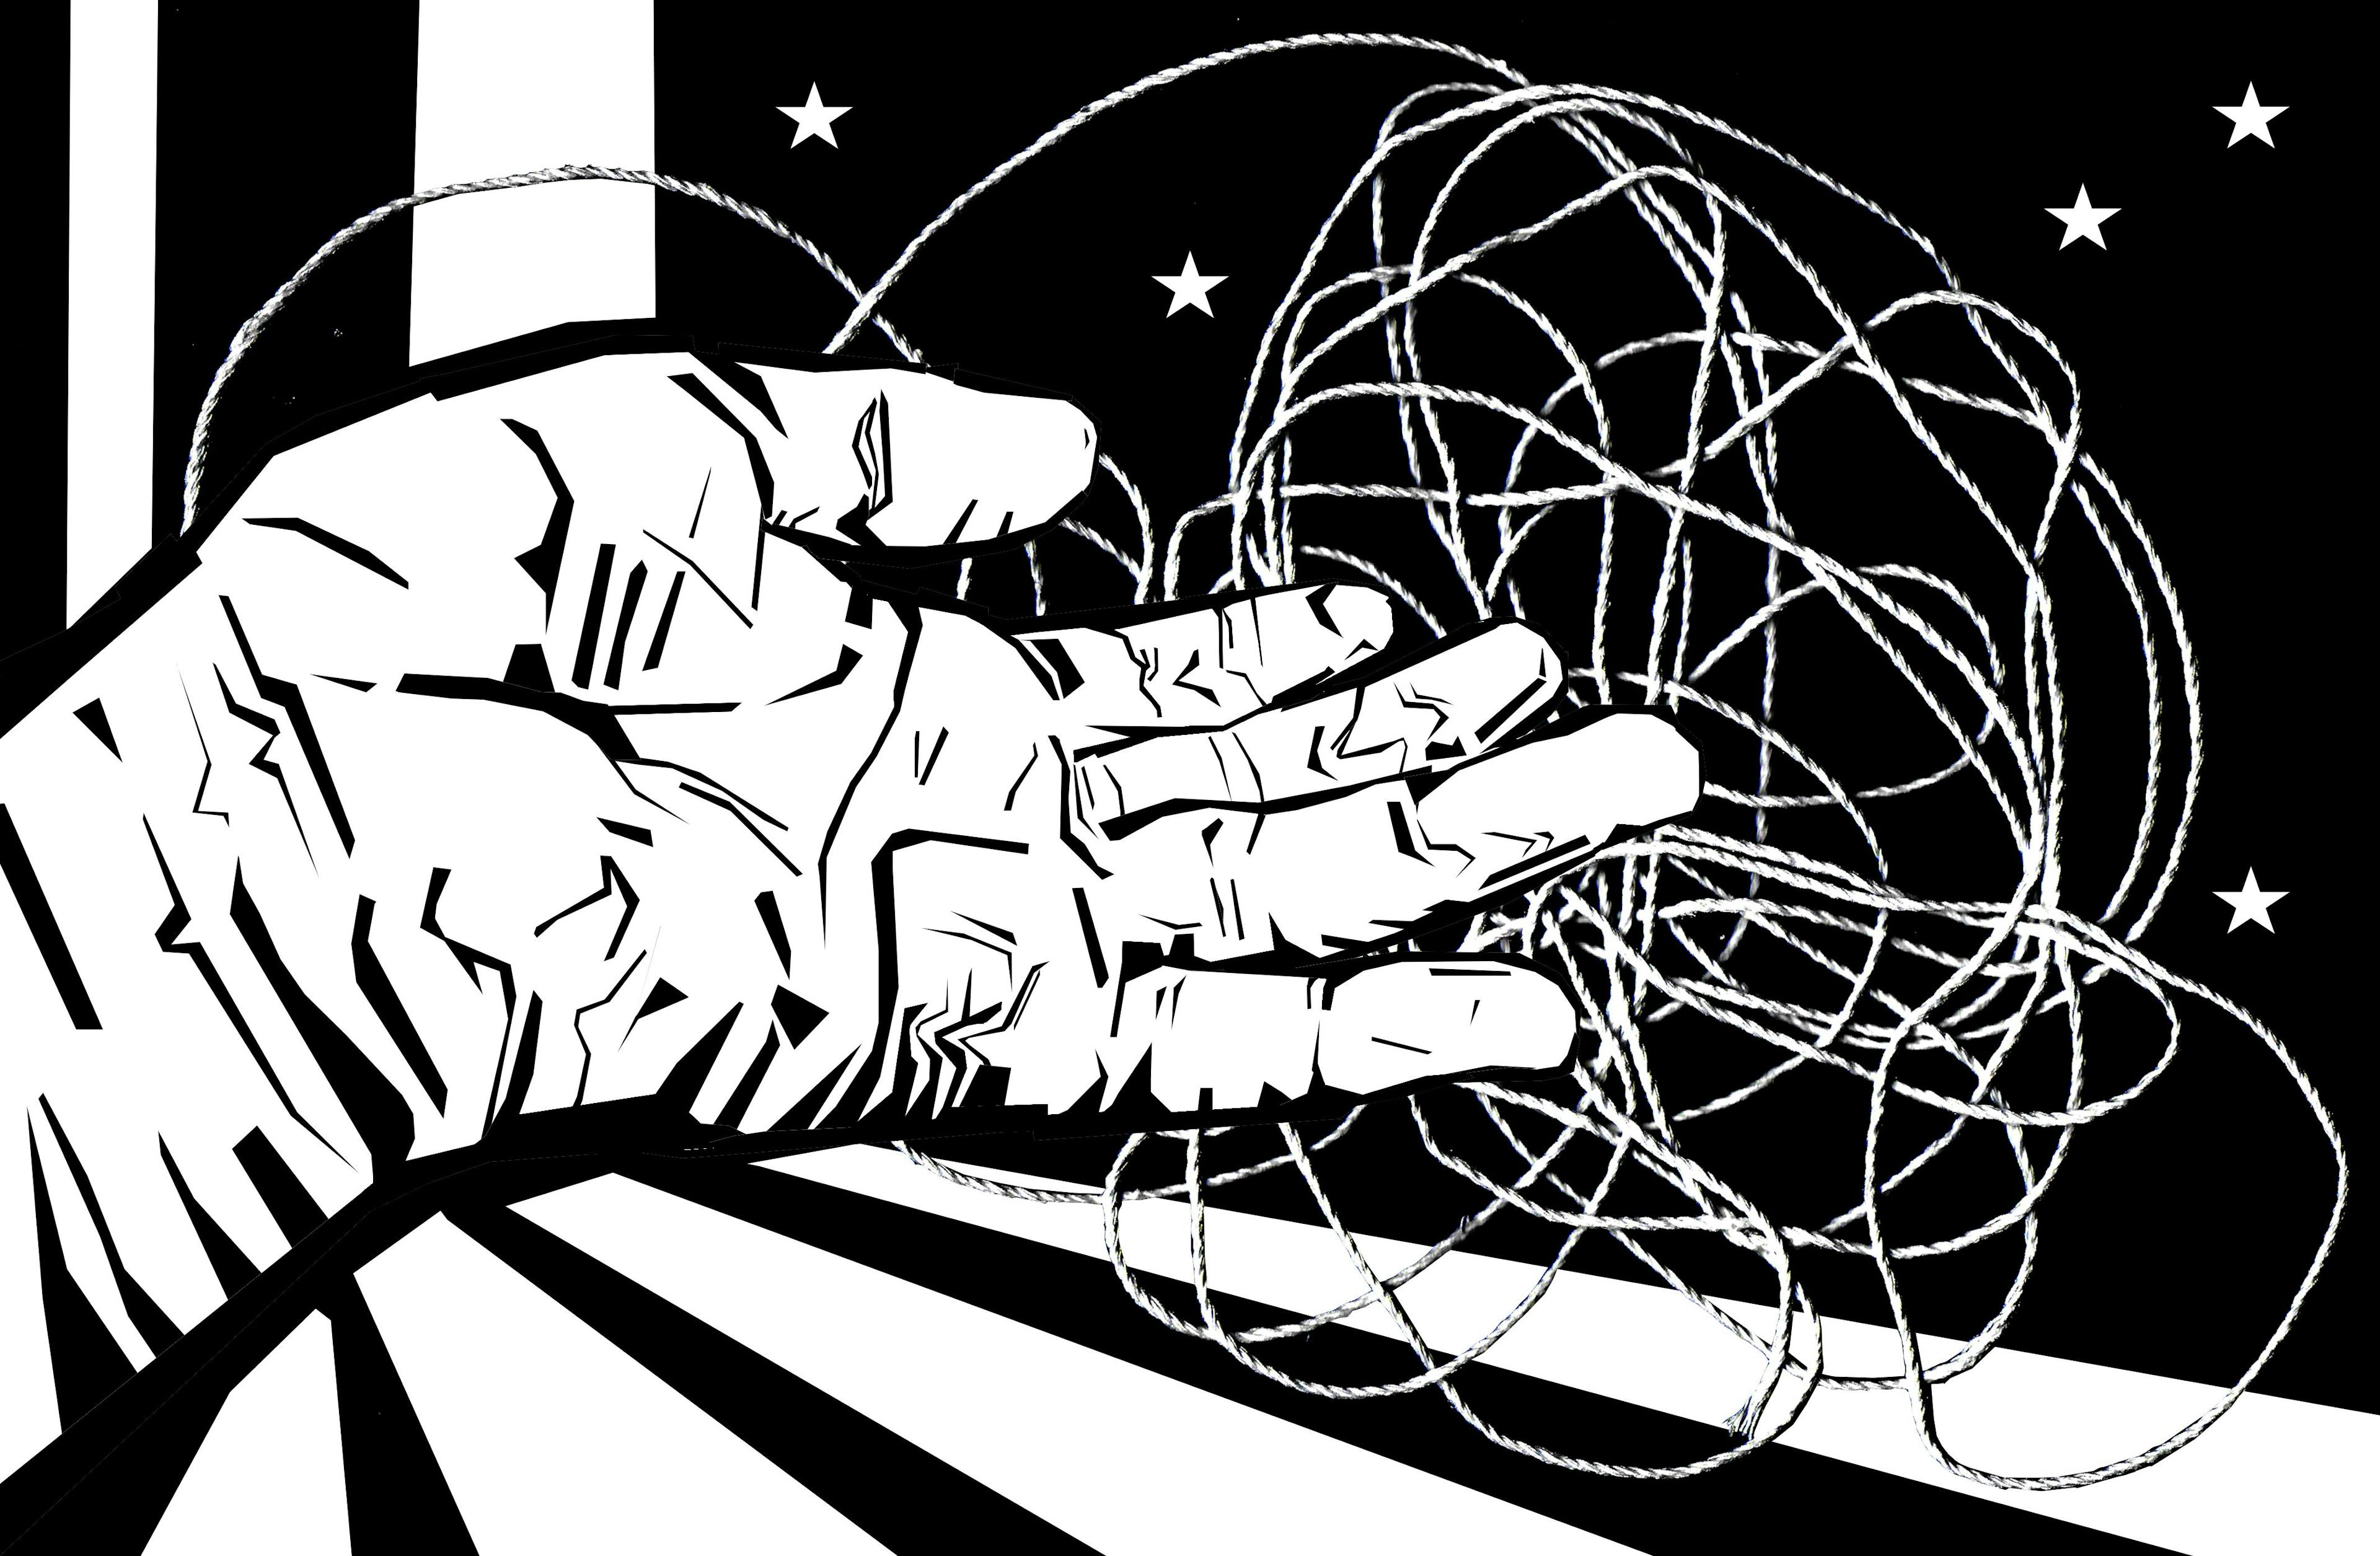 Graphic illustration of a hand, tangled string, and stars